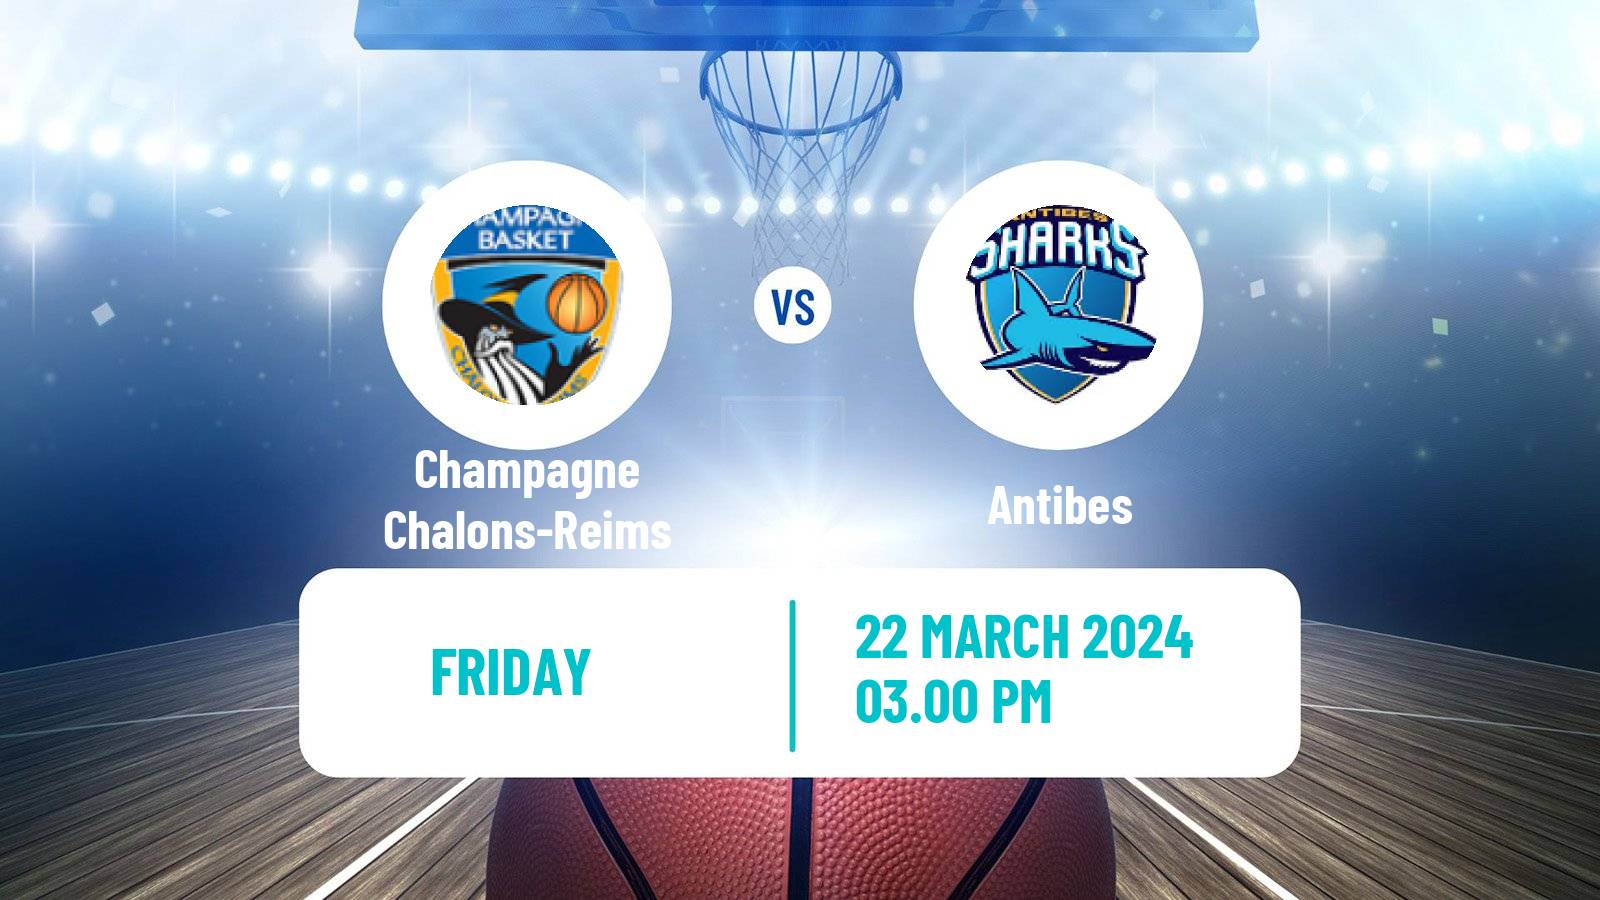 Basketball French LNB Pro B Champagne Chalons-Reims - Antibes